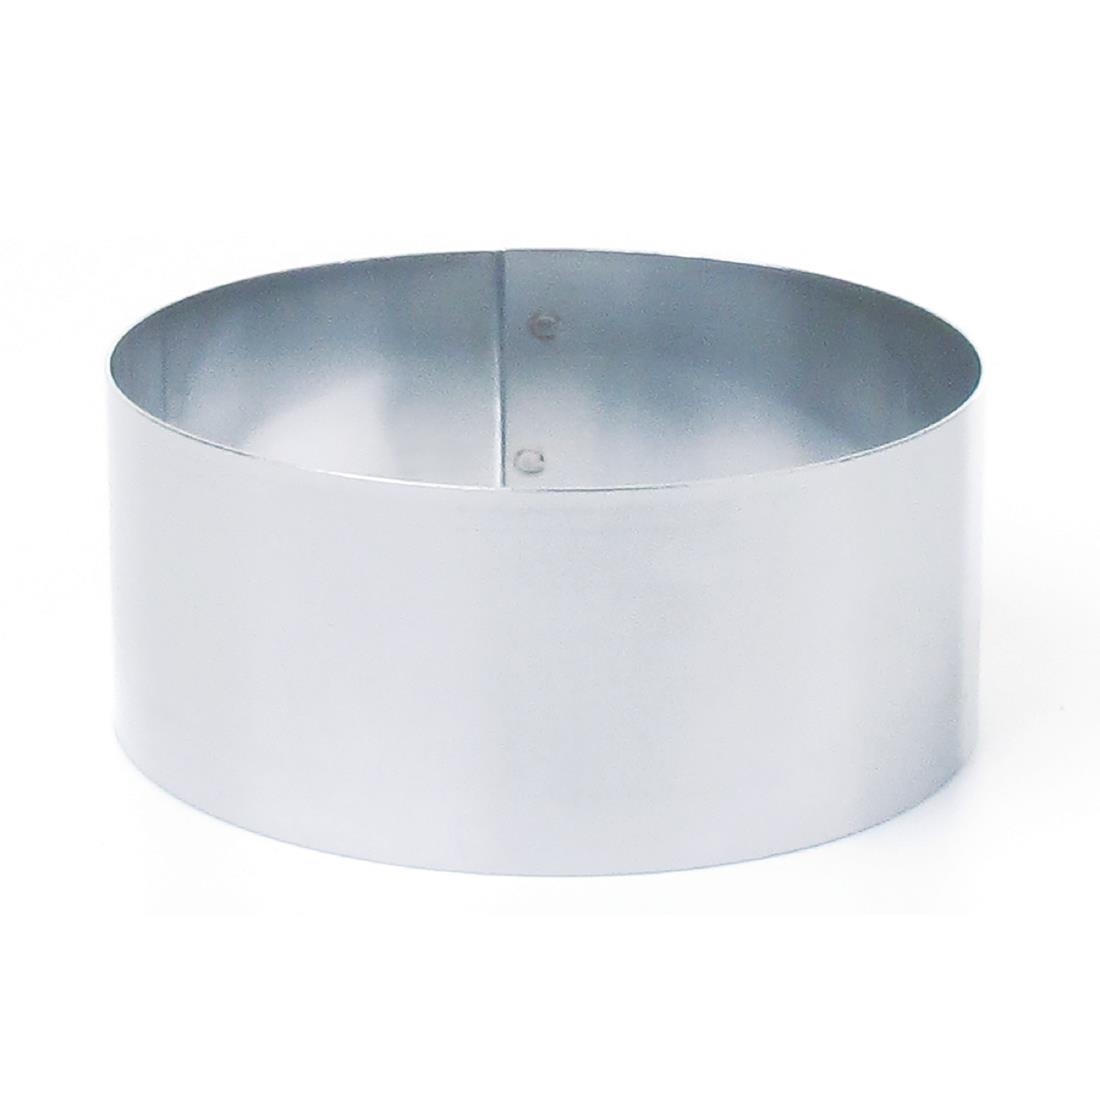 Matfer Bourgeat Stainless Steel Mousse Ring 140 x 60mm